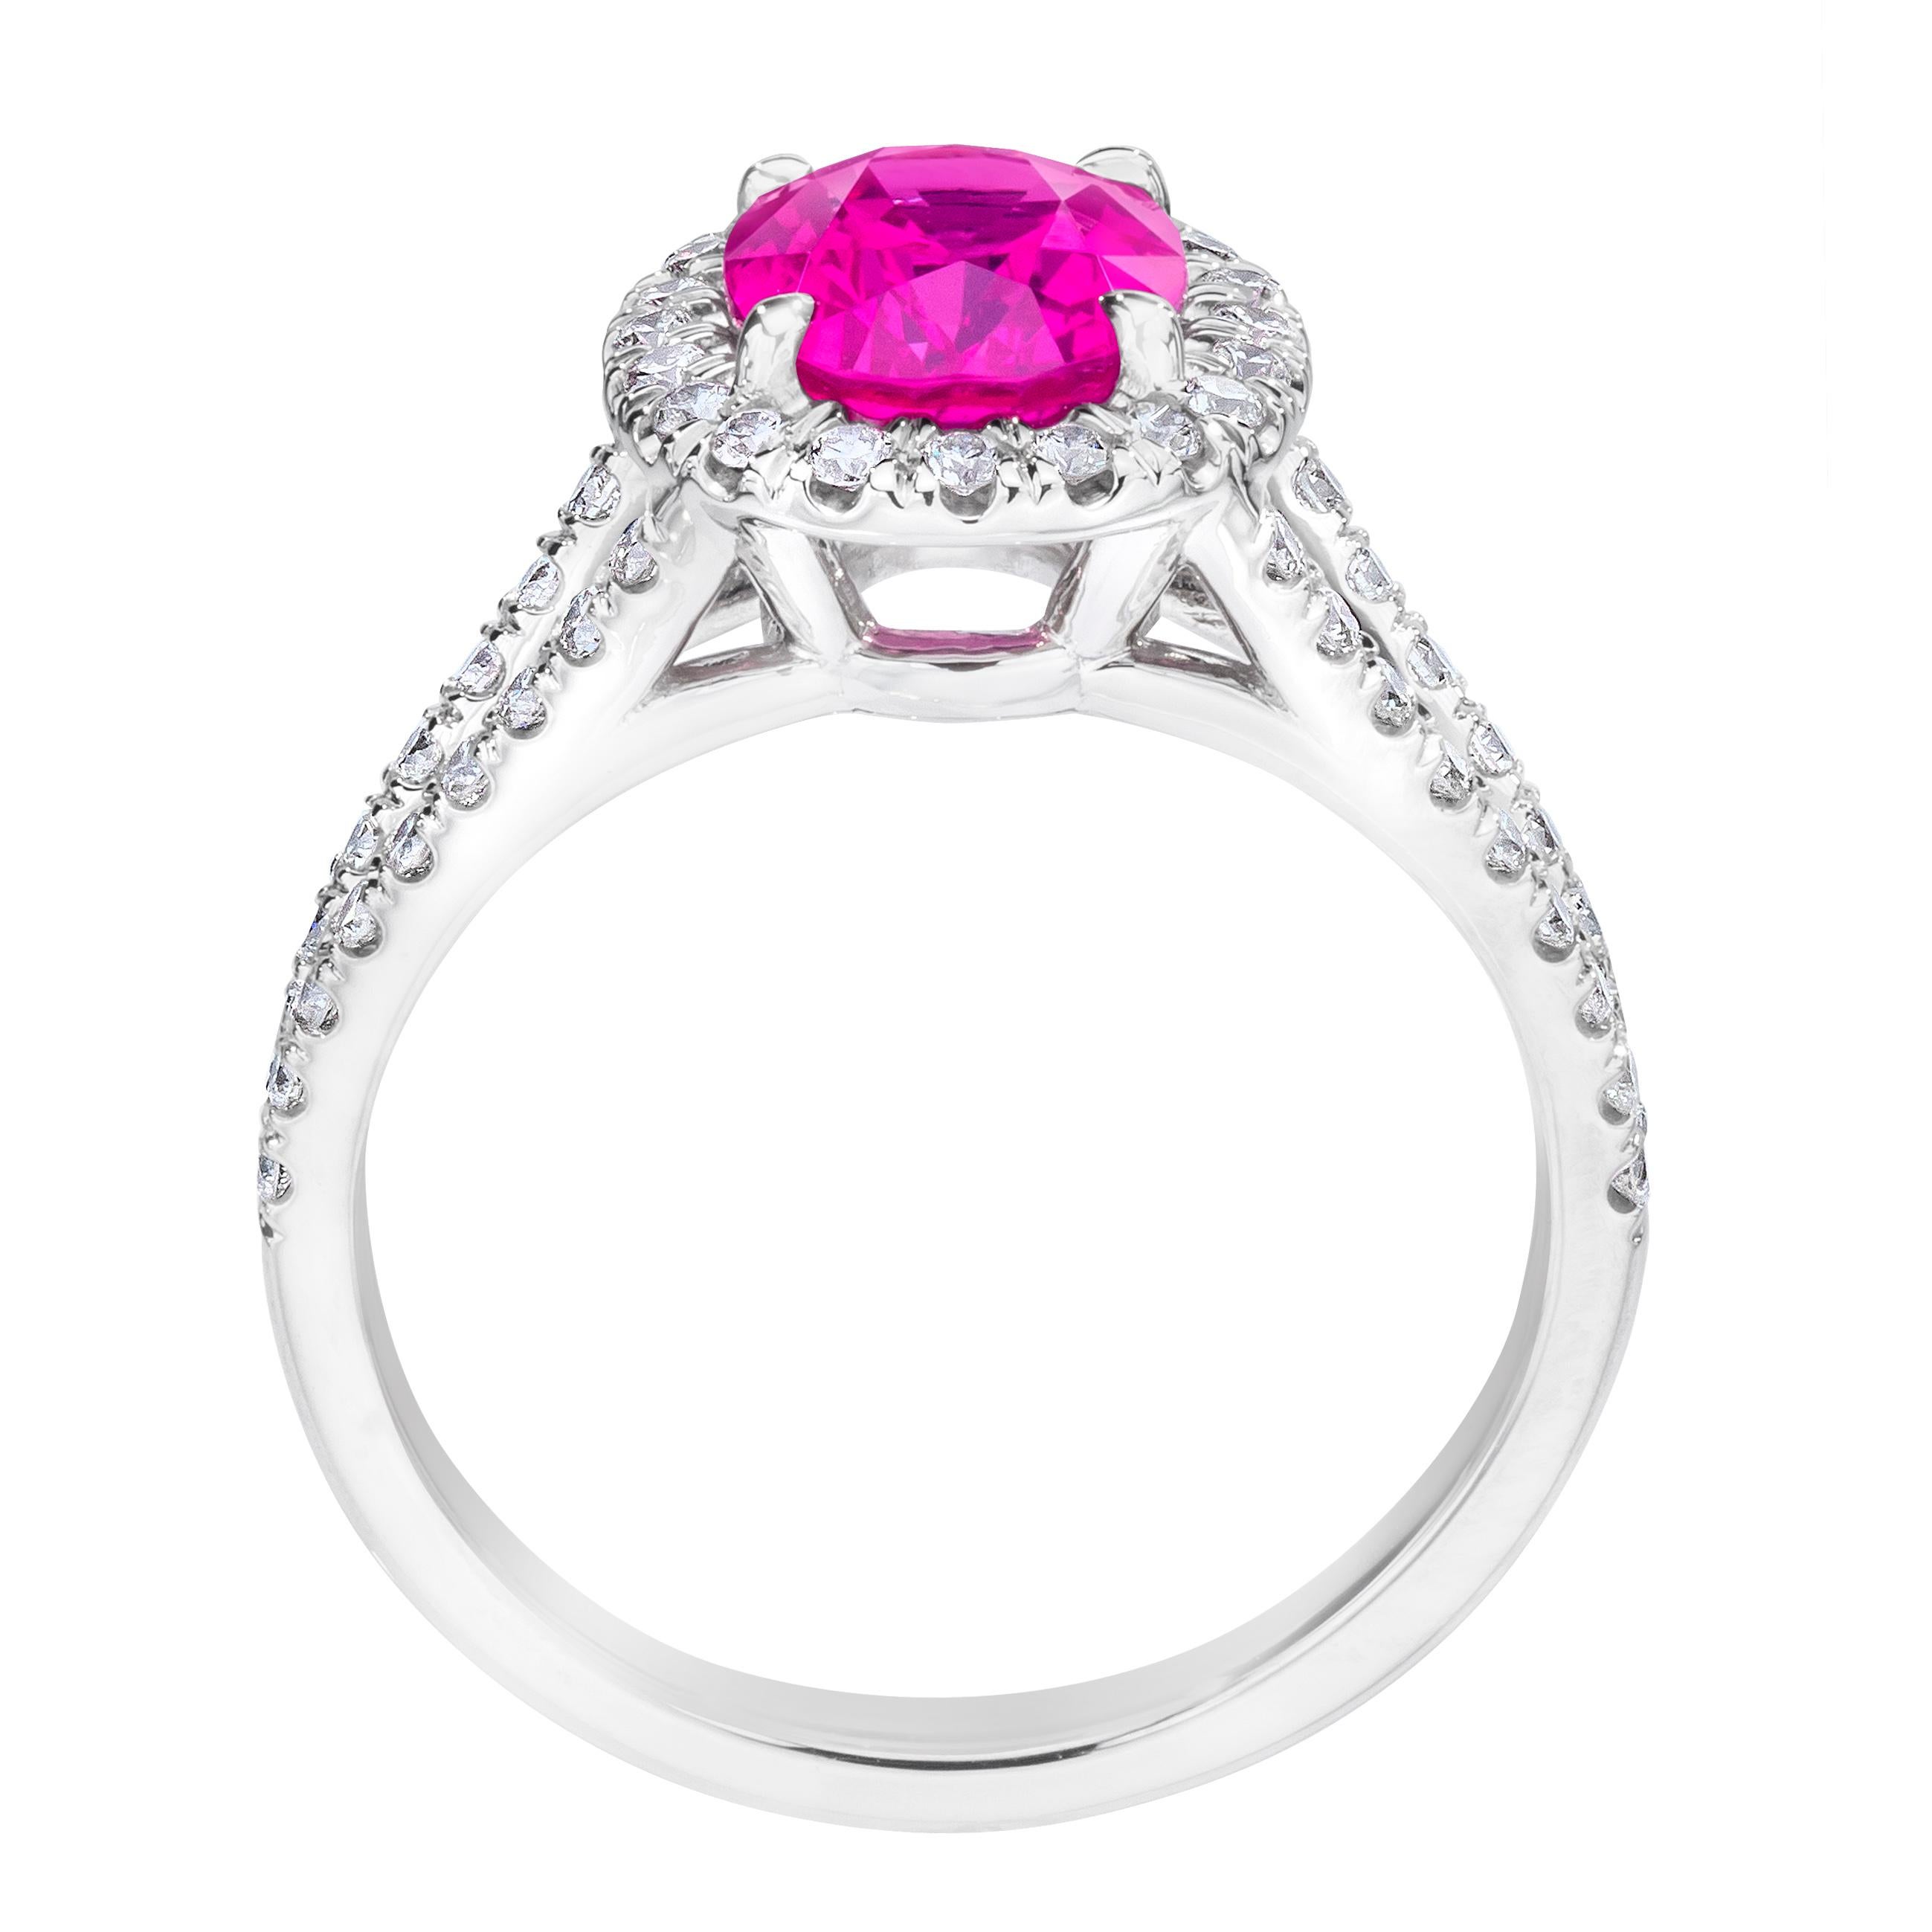 Contemporary 2.47 Carat Oval Pink Sapphire and Diamond Ring